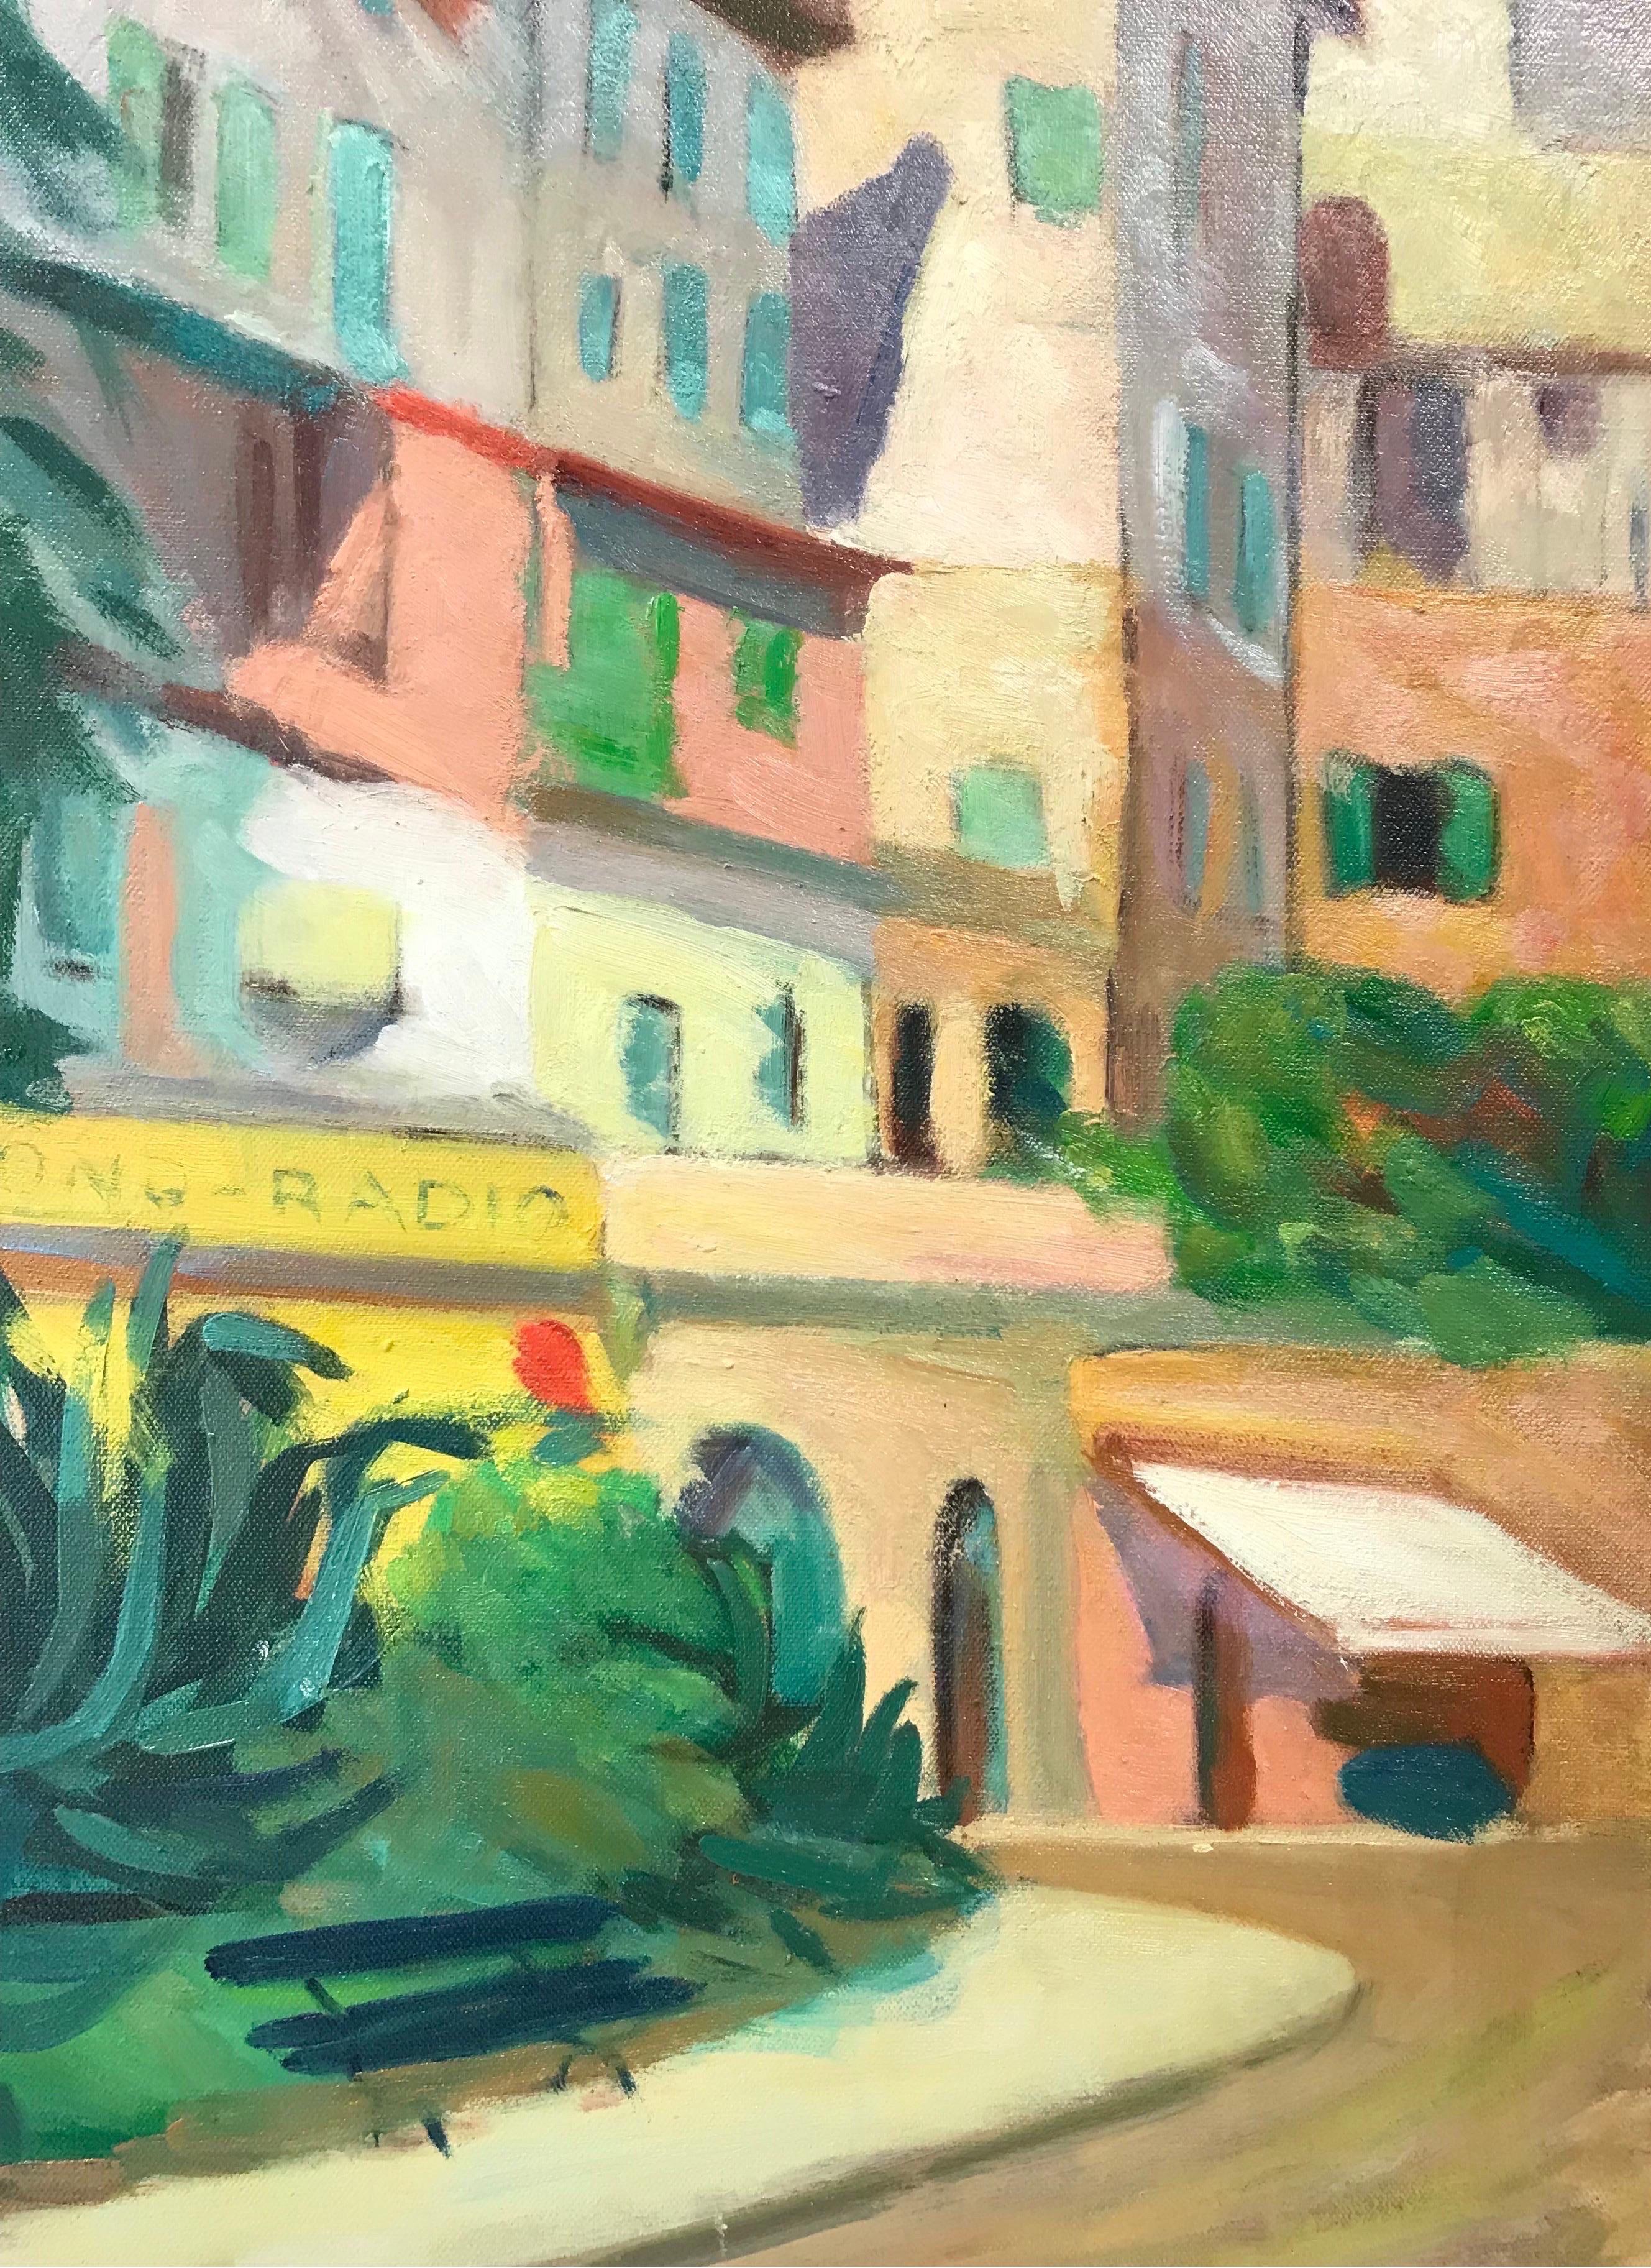 Artist/ School: French School, circa 1950's

Title: Sunny Provencal Street Scene

Medium: oil on canvas, unframed

Canvas: 31.5 x 25.75 inches

Provenance: private collection, France

Condition: The painting is in overall very good and sound